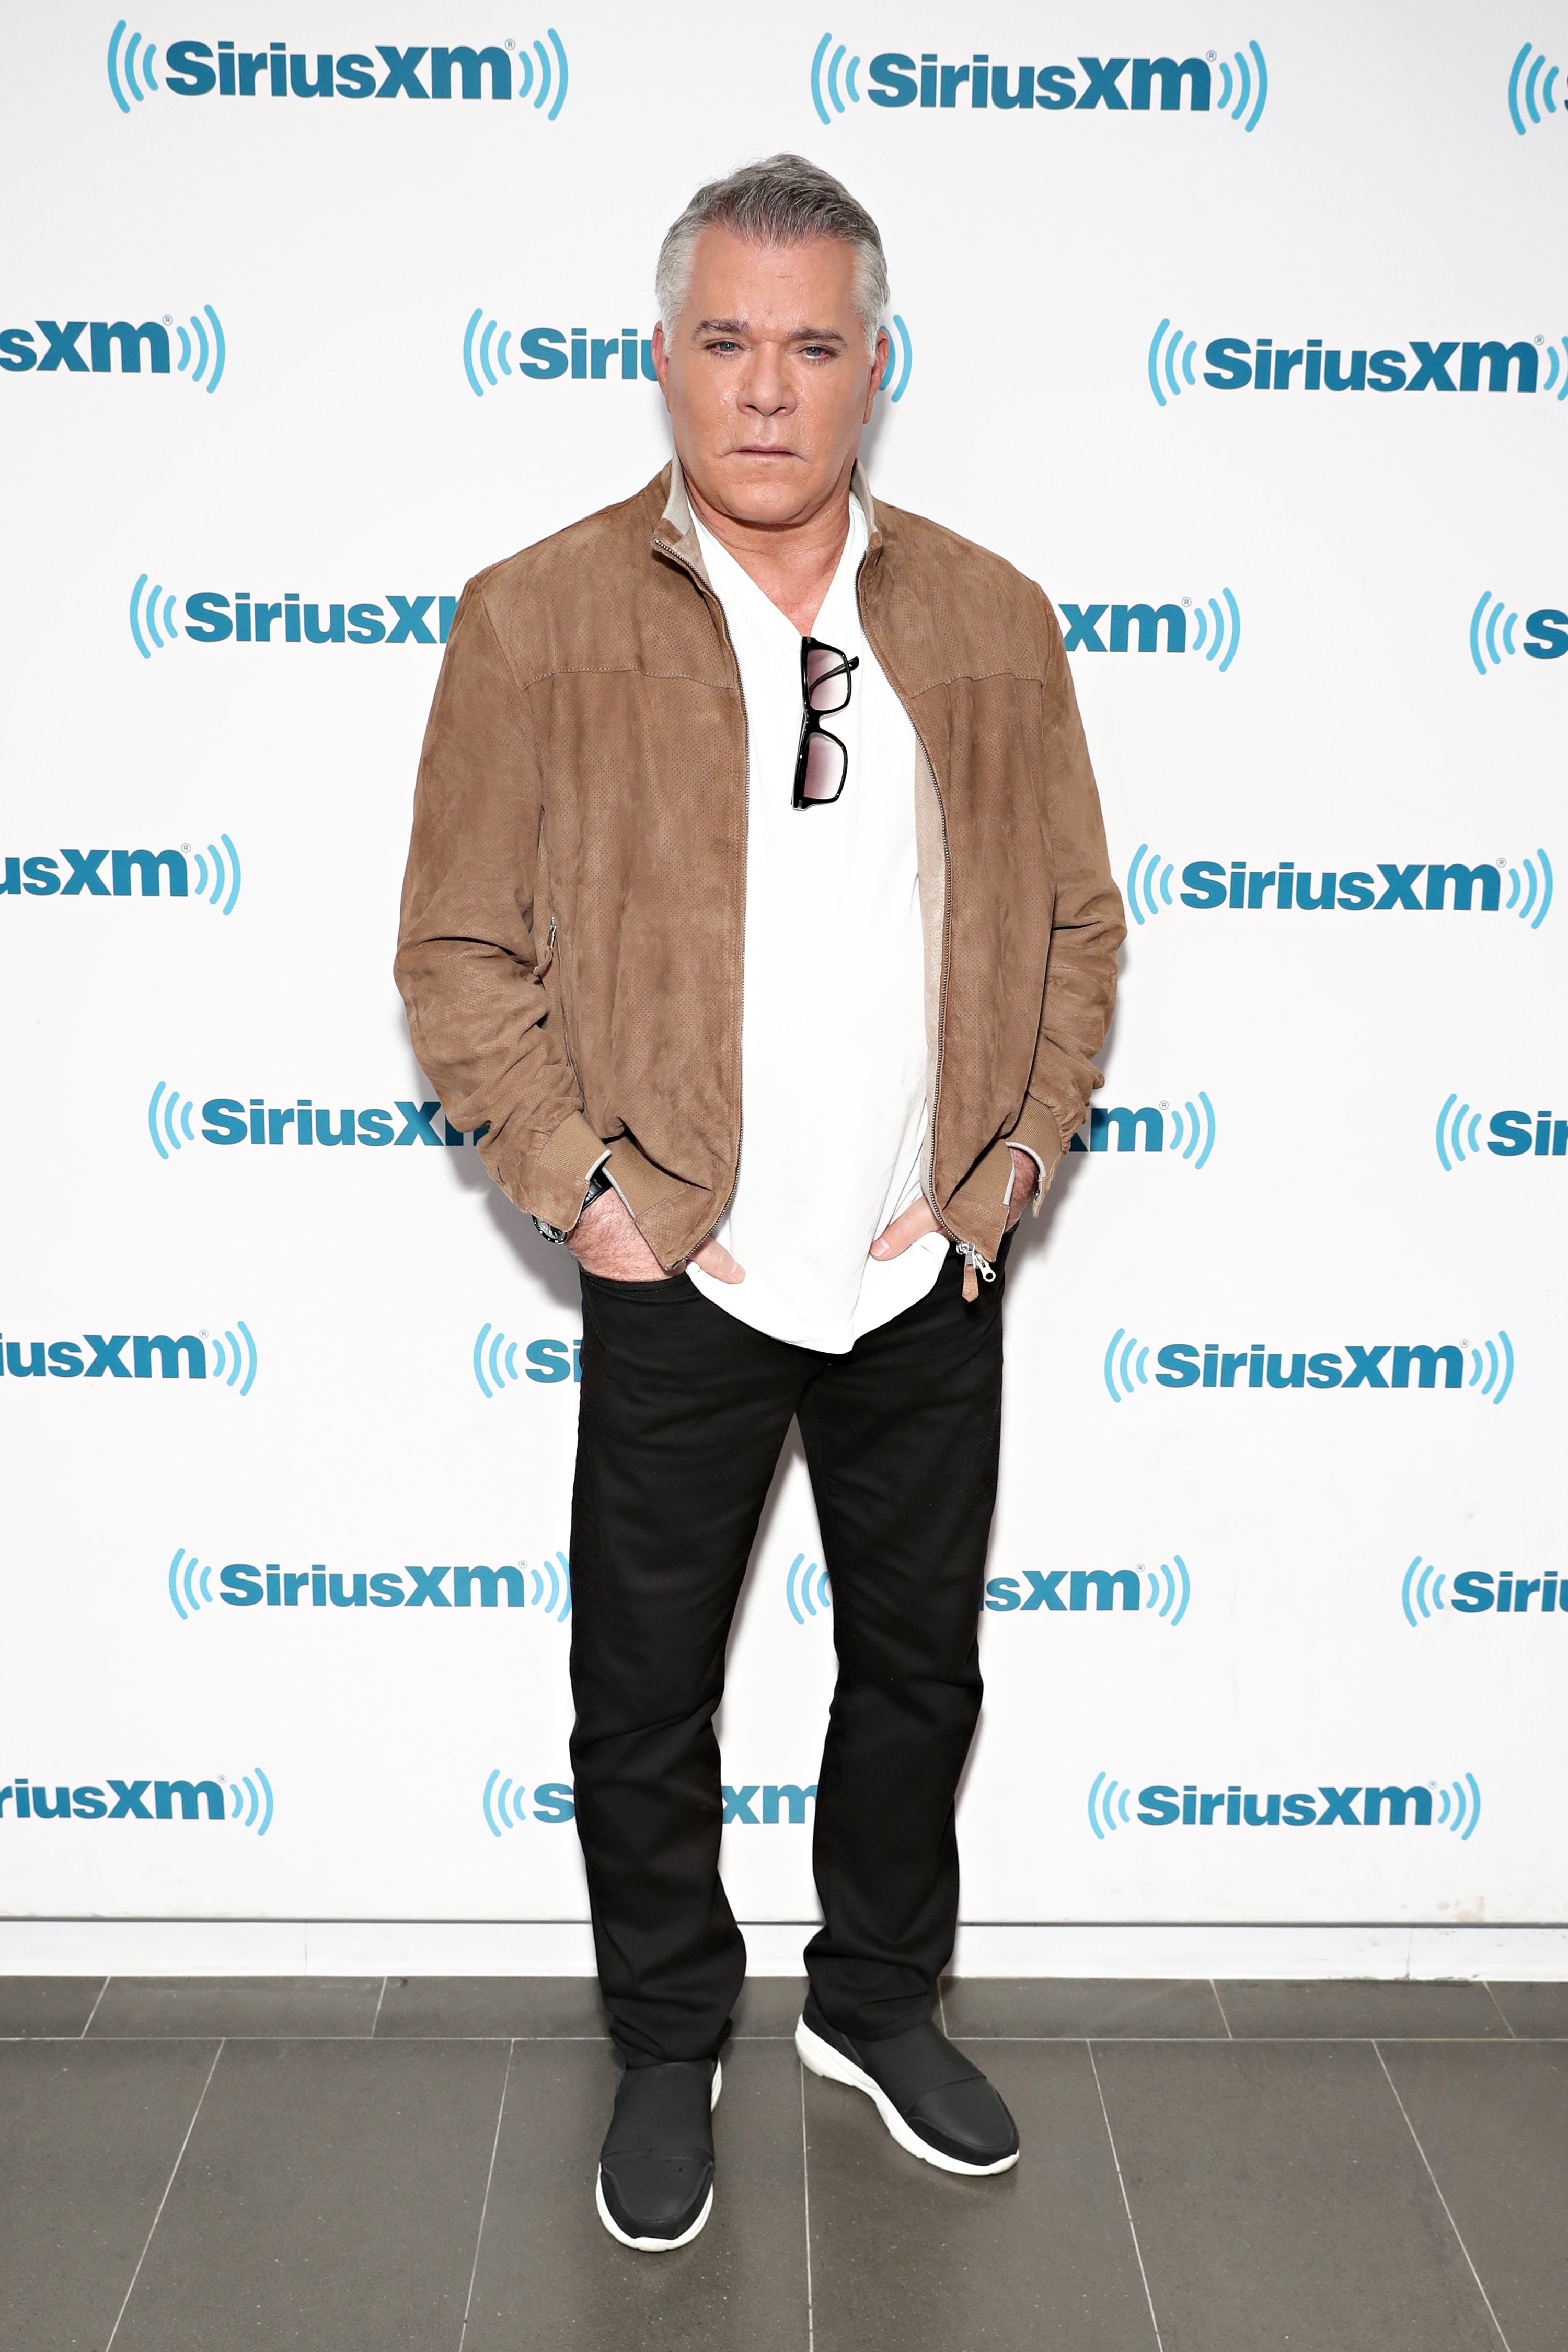 Ray Liotta pictured visiting the siriusxm studios in 2018 in New York | Source: Getty Images